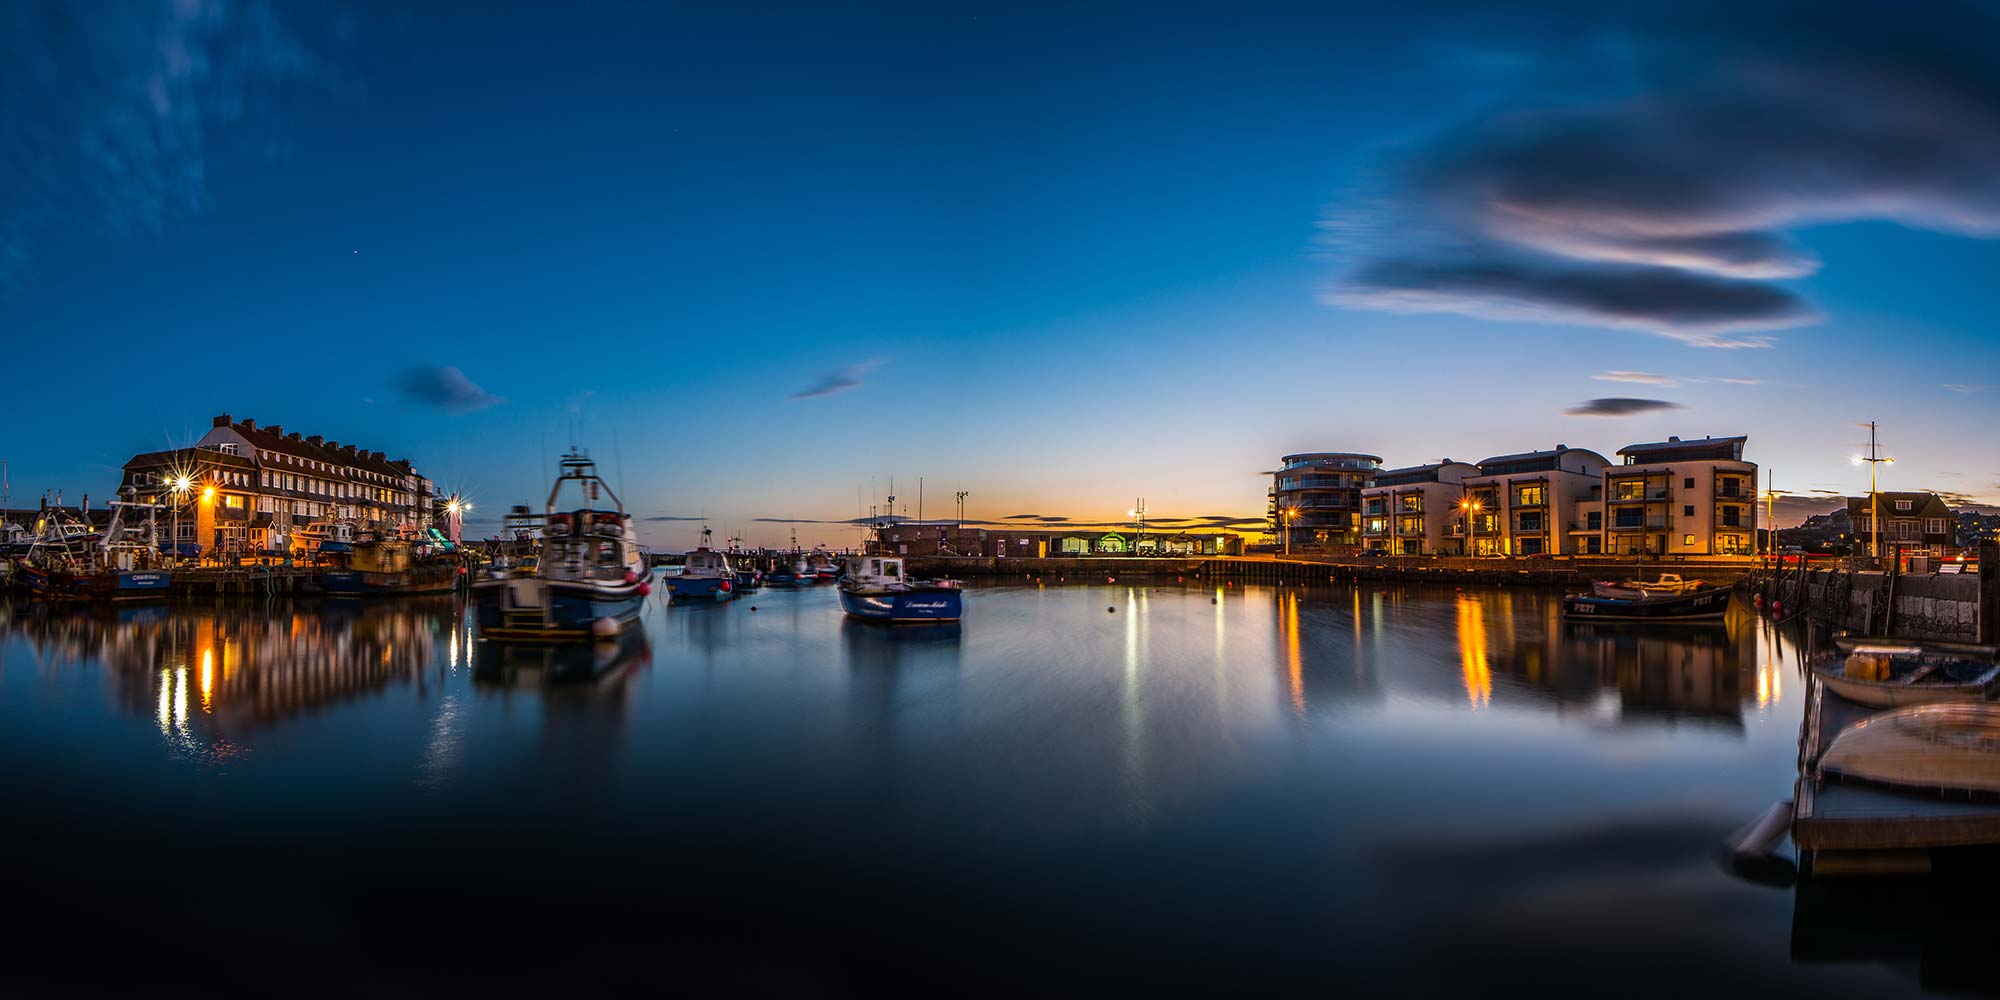 West Bay Harbour at night